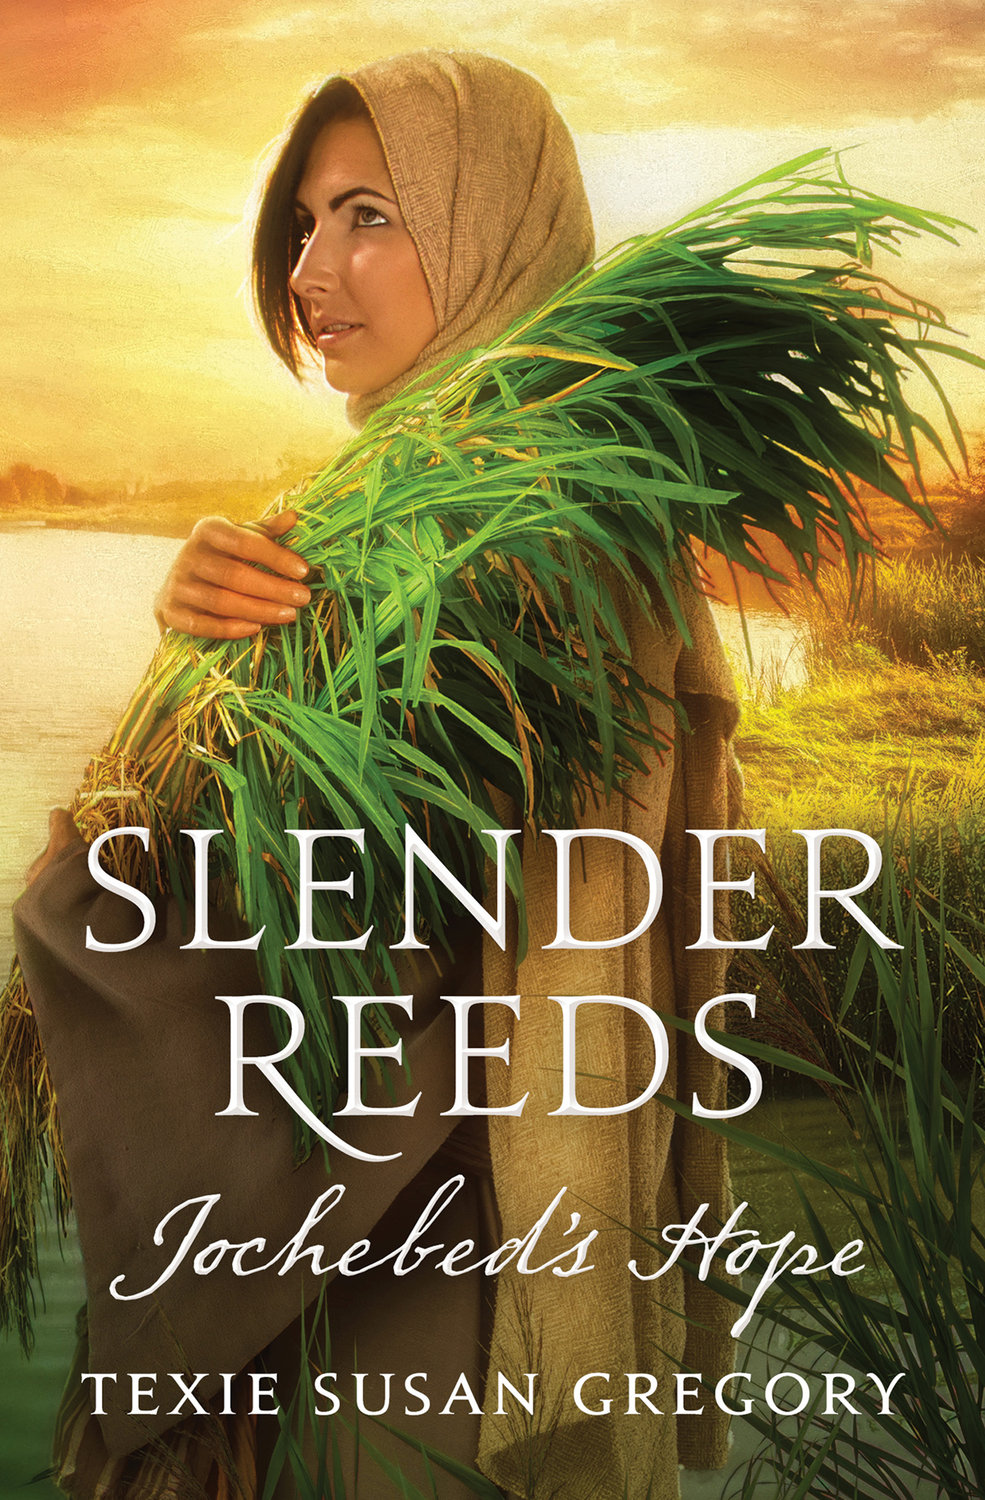 Author of “Slender Reeds,” Texie “Susan” Gregory will travel from Washington D.C. to showcase her first book at the Nov. 12 event at Book ‘n’ Brush.